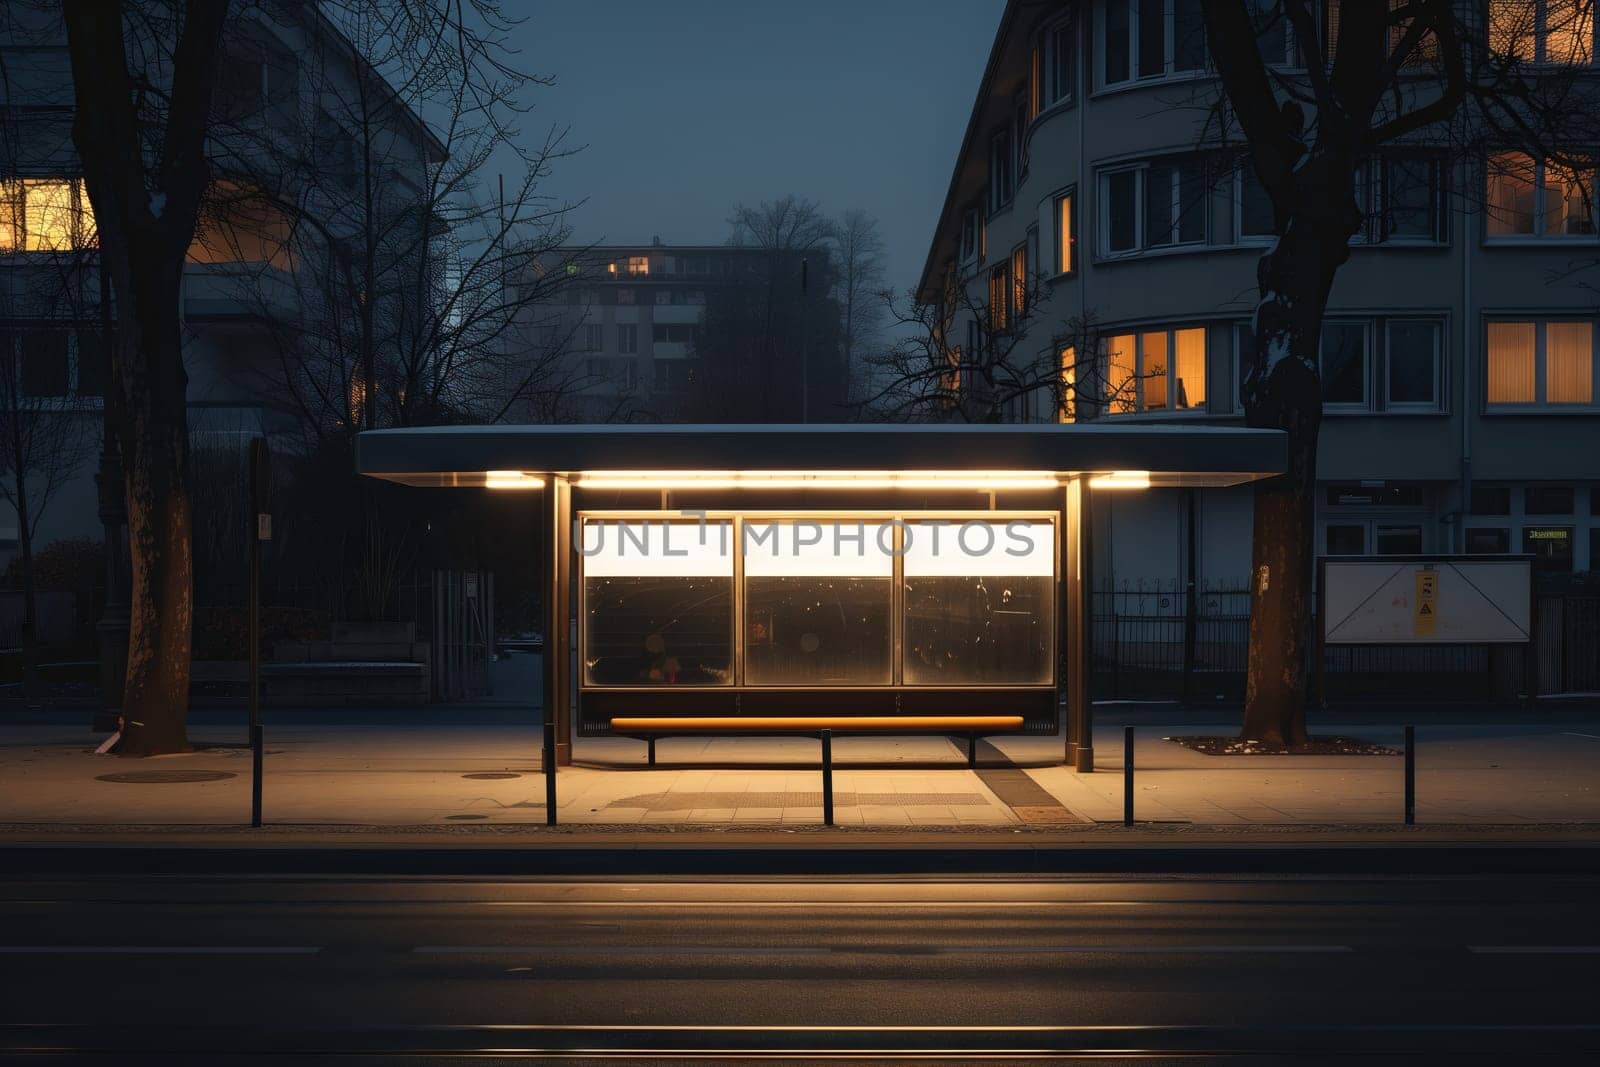 A bus stop on the side of the road is illuminated by the city lights at midnight, casting a glow on the asphalt and highlighting the buildings facade and roof against the darkness